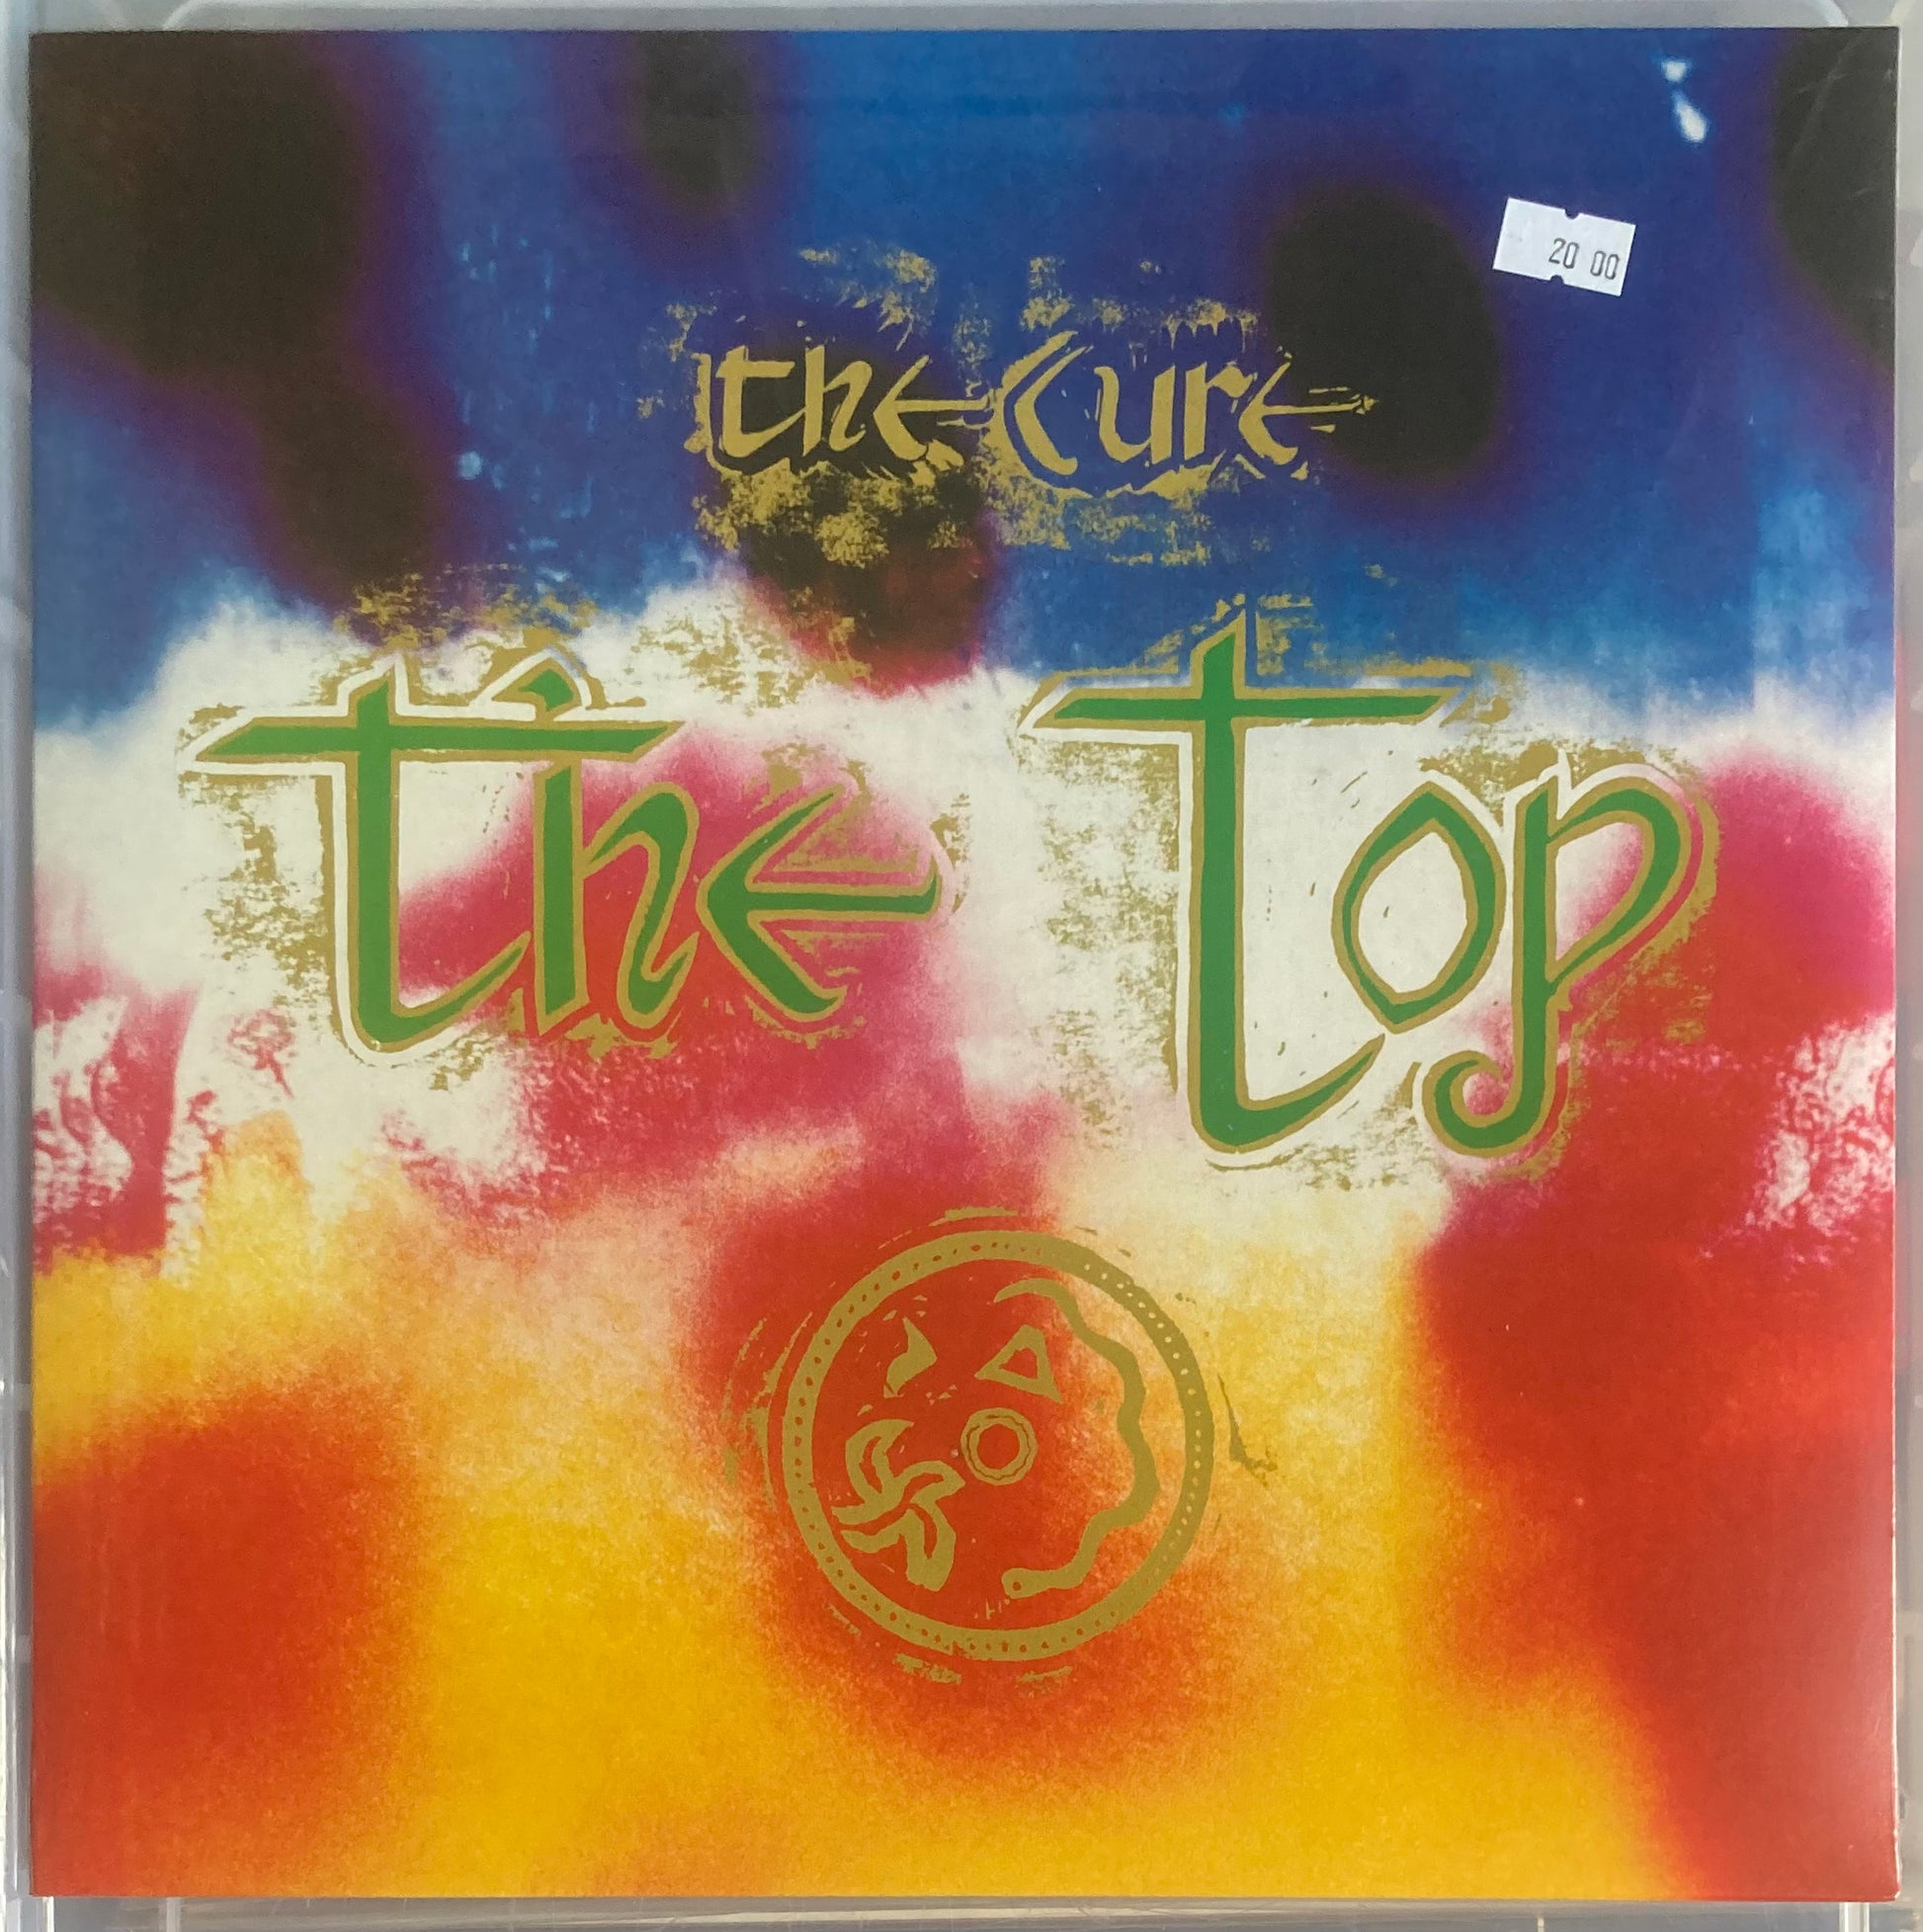 The front of 'The Cure - The Top' in vinyl